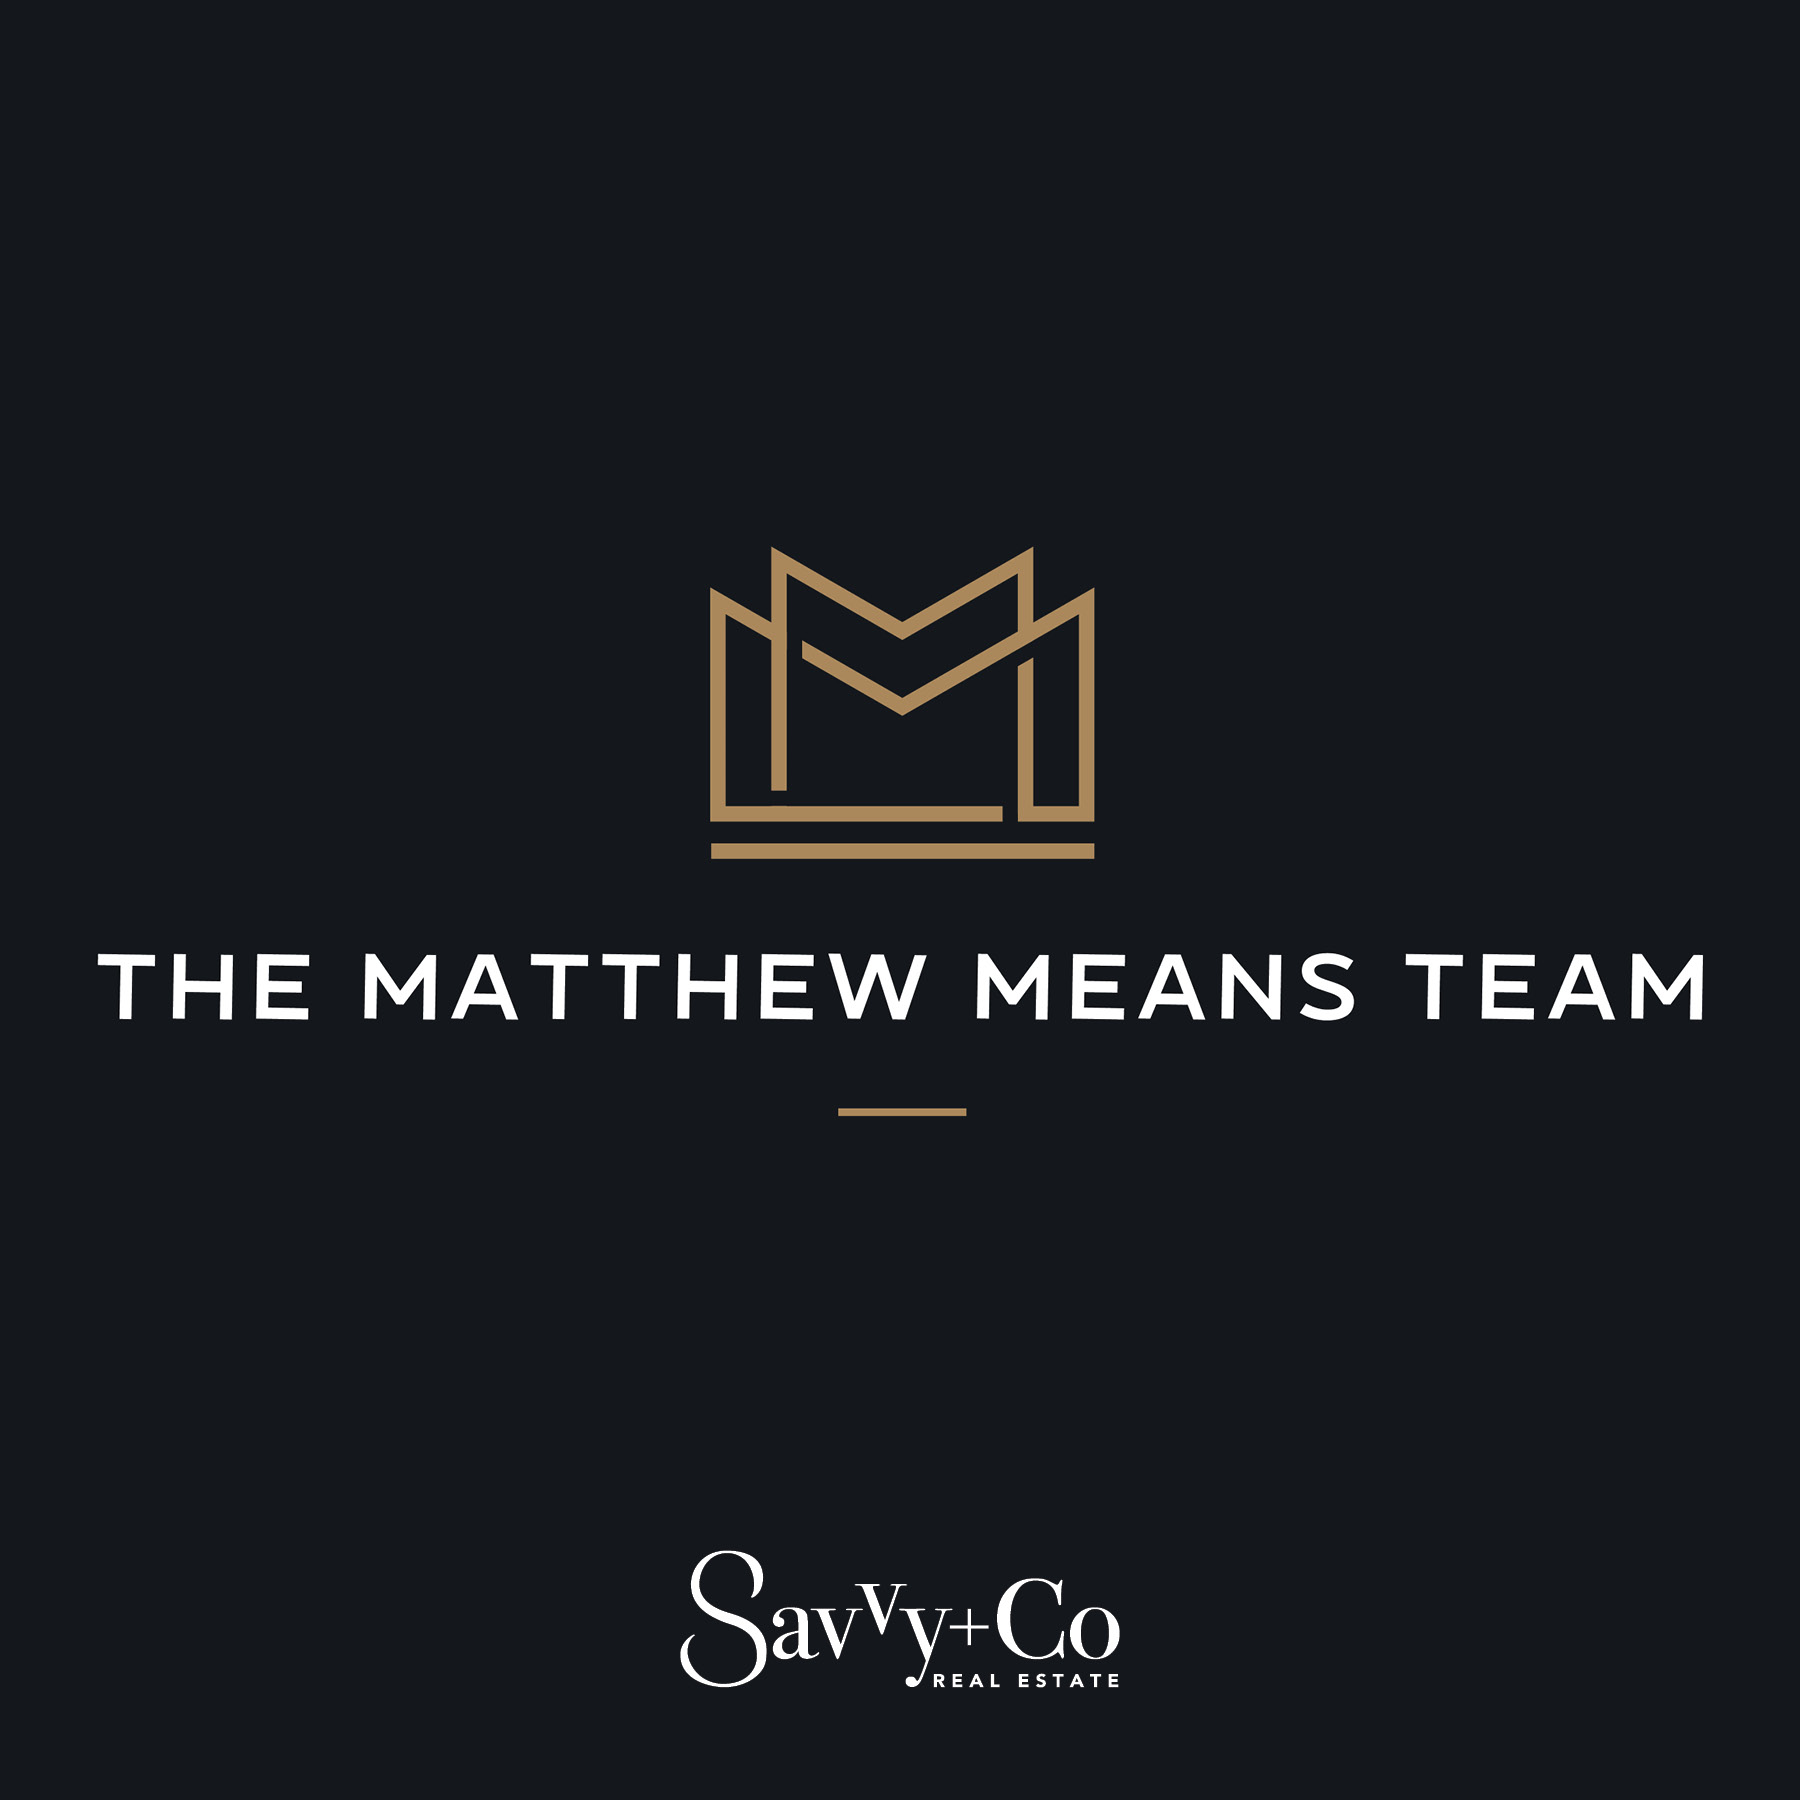 The Matthew Means Team